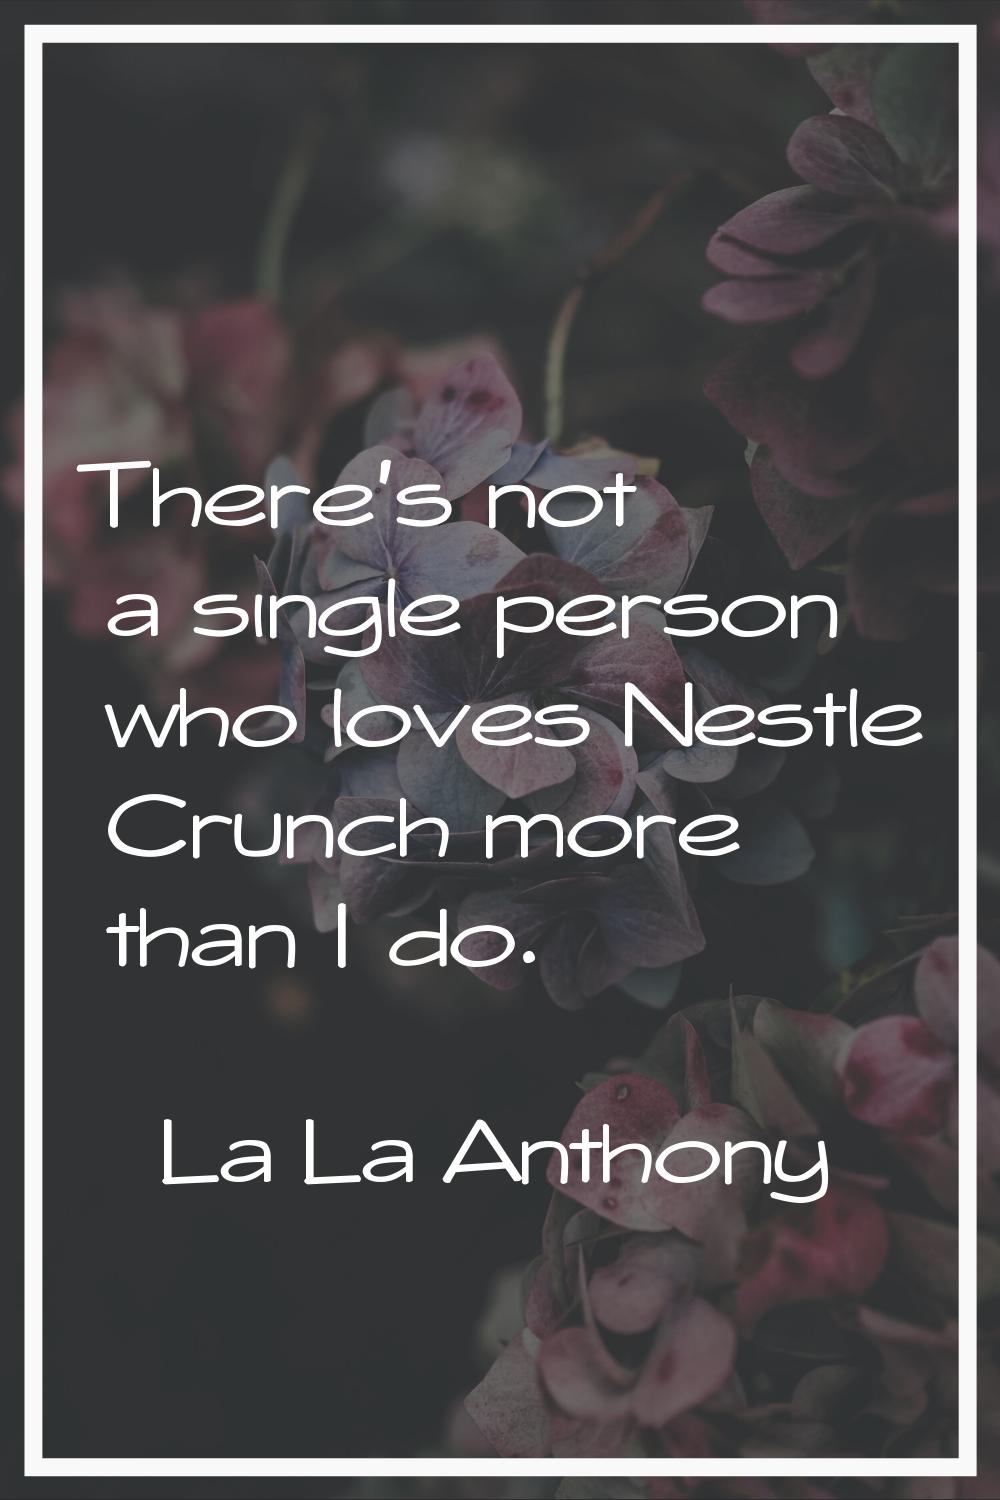 There's not a single person who loves Nestle Crunch more than I do.